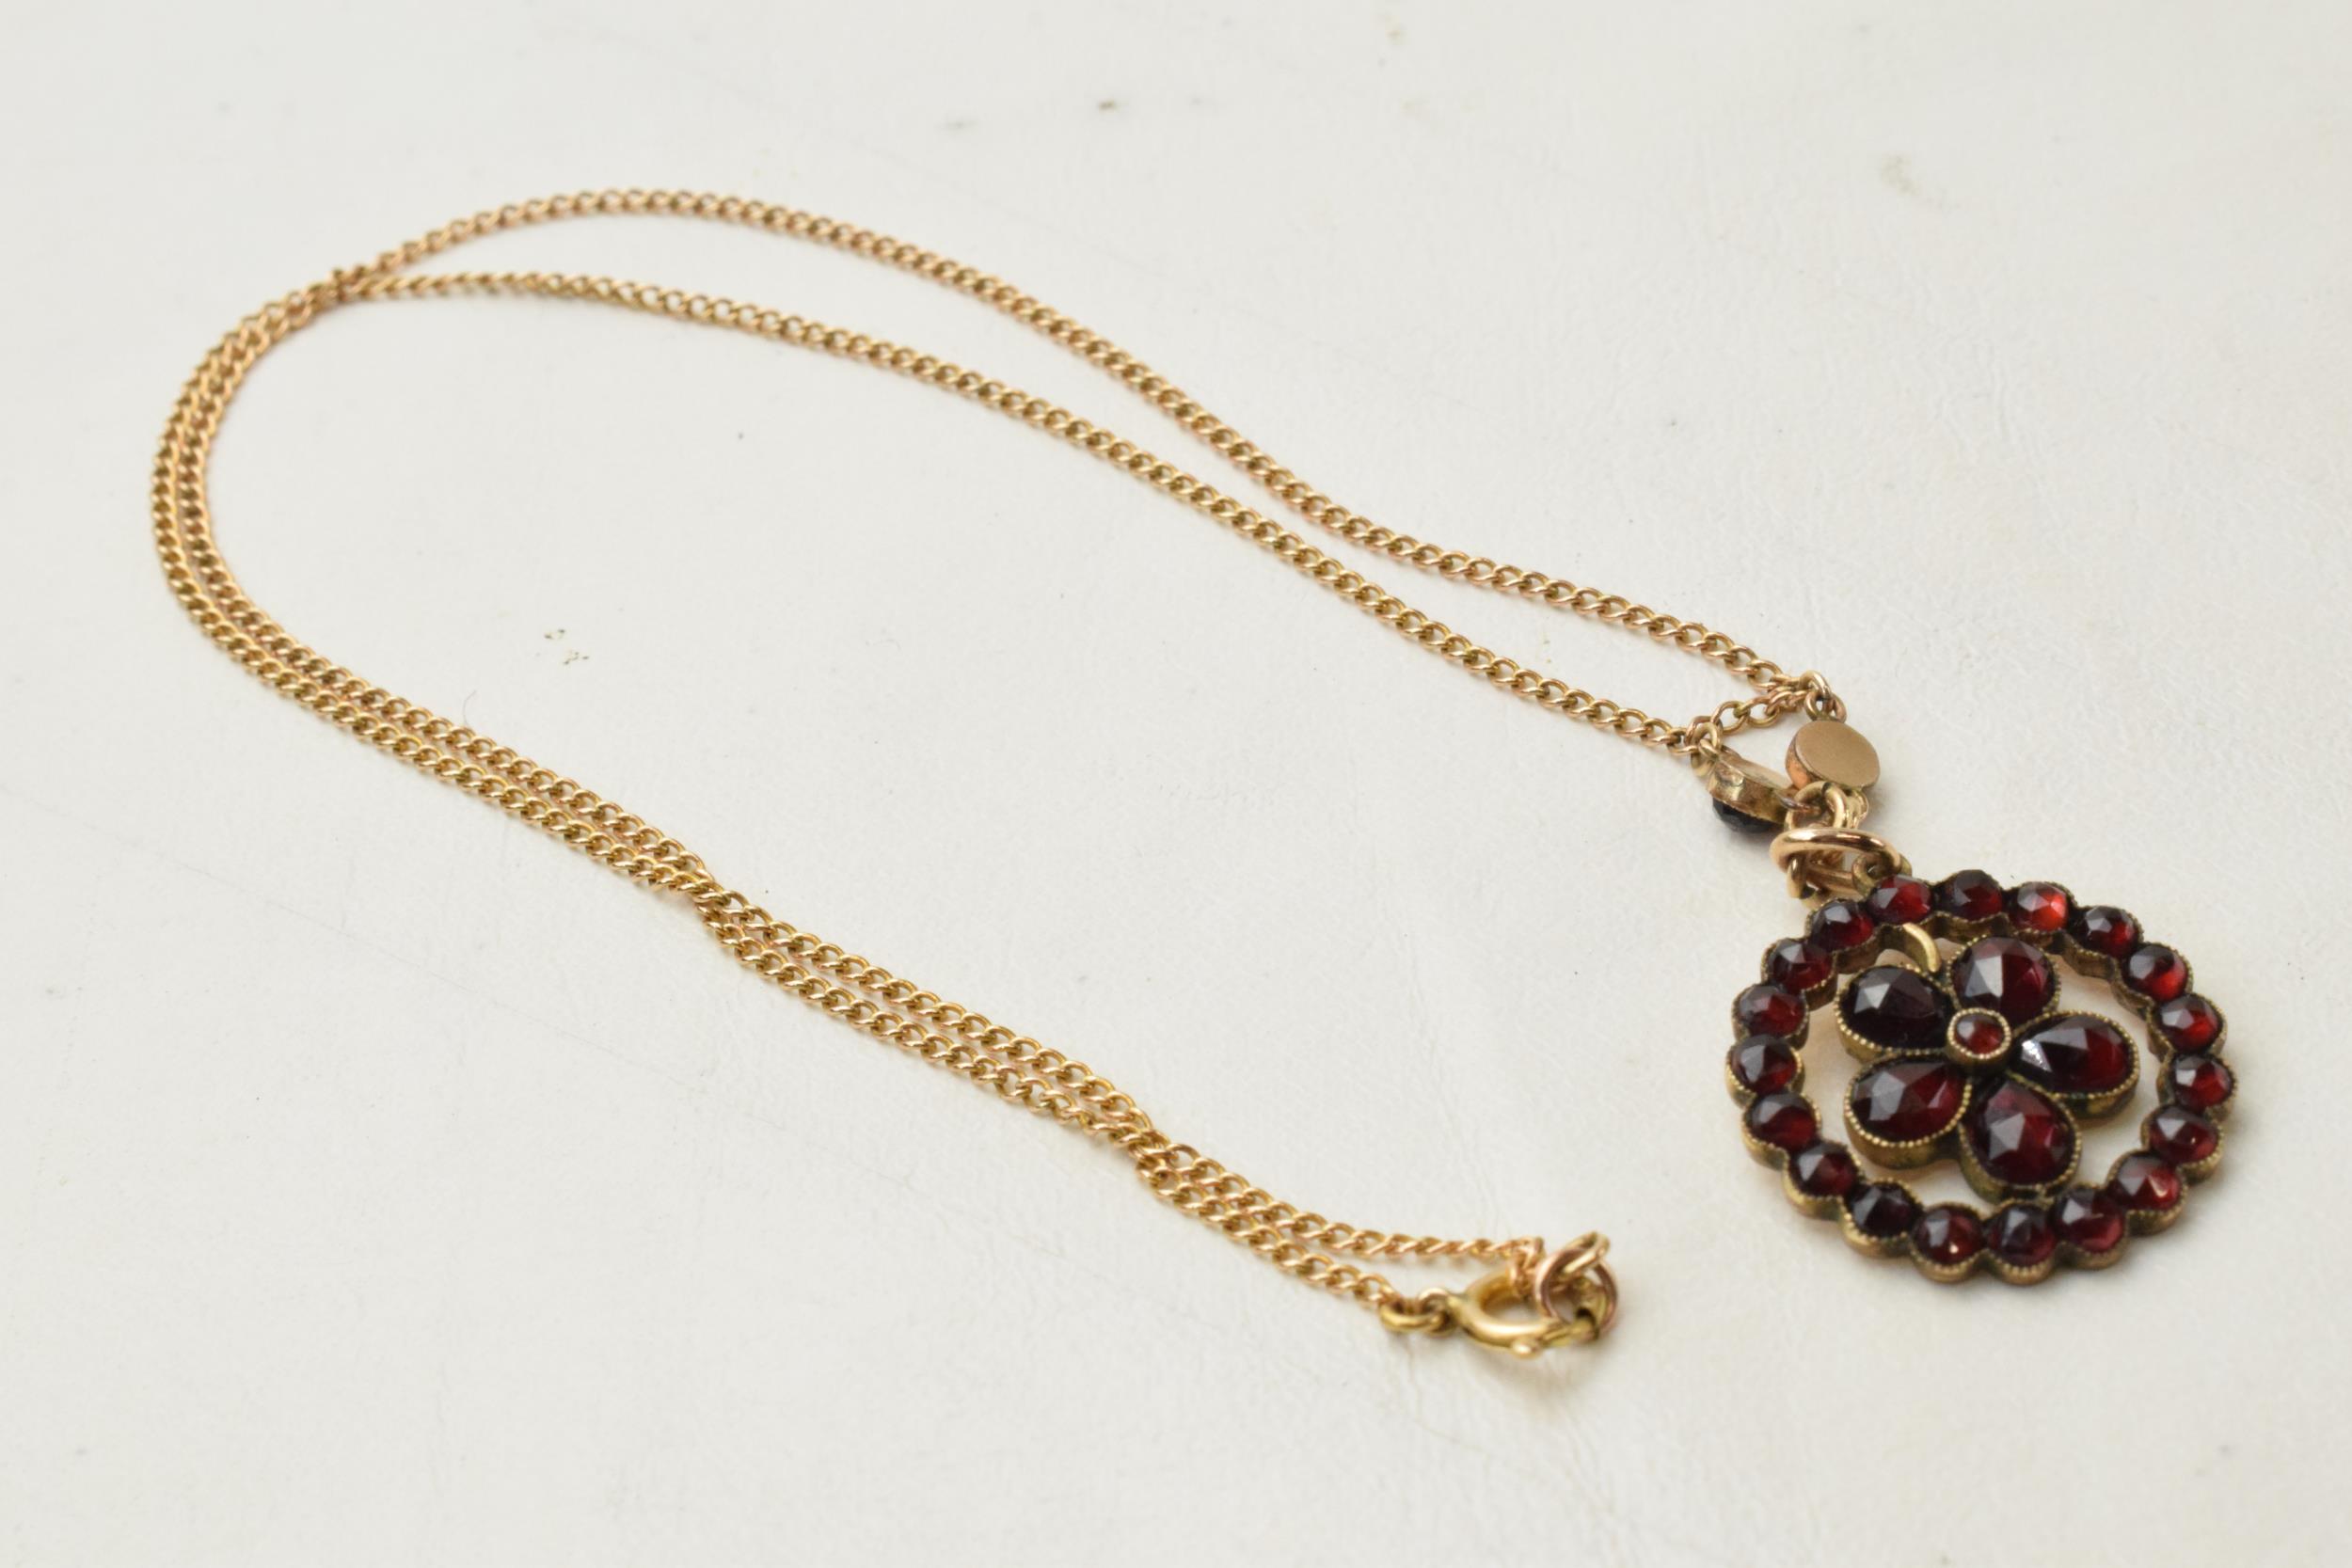 9ct gold chain with gilt metal garnet pendant, total weight 4.3 grams.